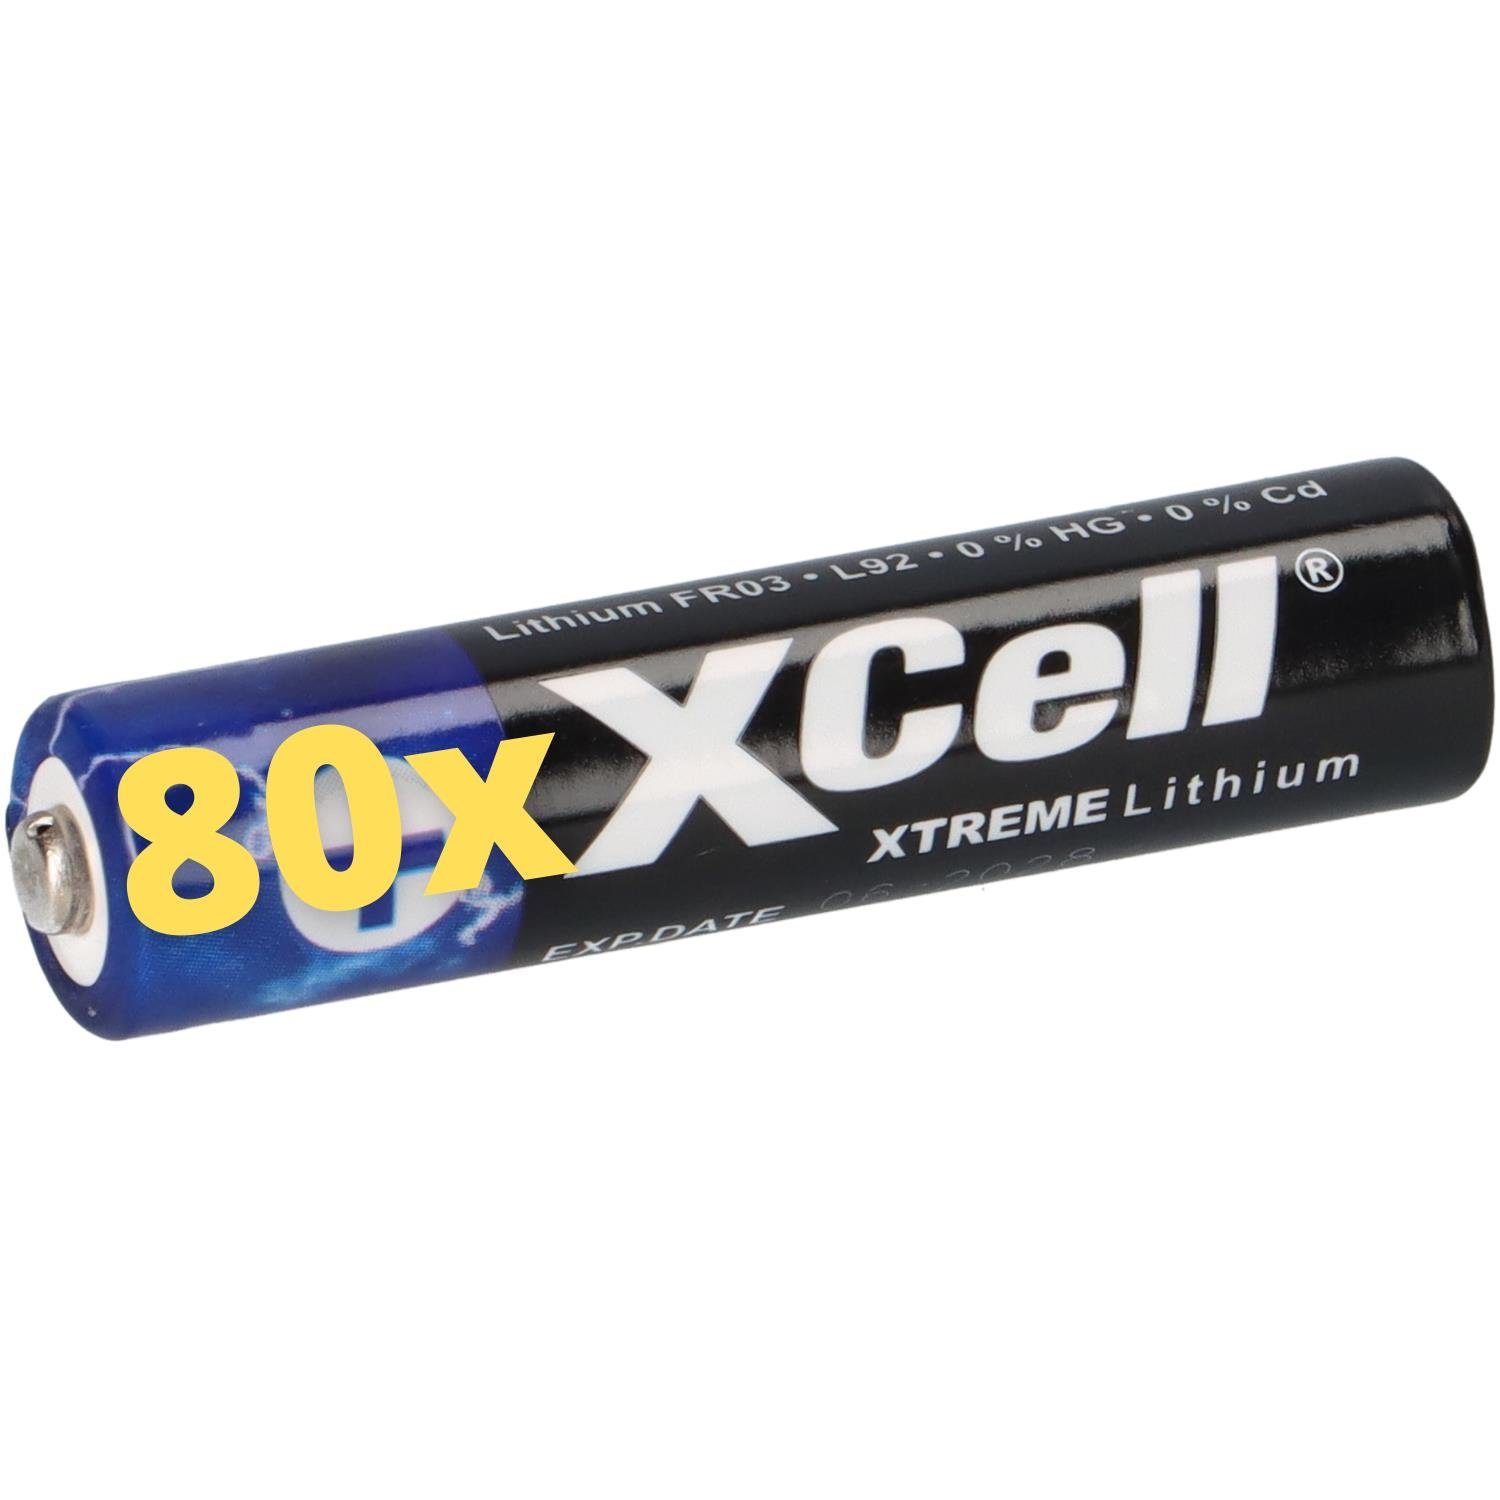 XCell 80x XTREME Lithium Batterie AAA Micro FR03 L92 XCell 20x 4er Blister  Batterie